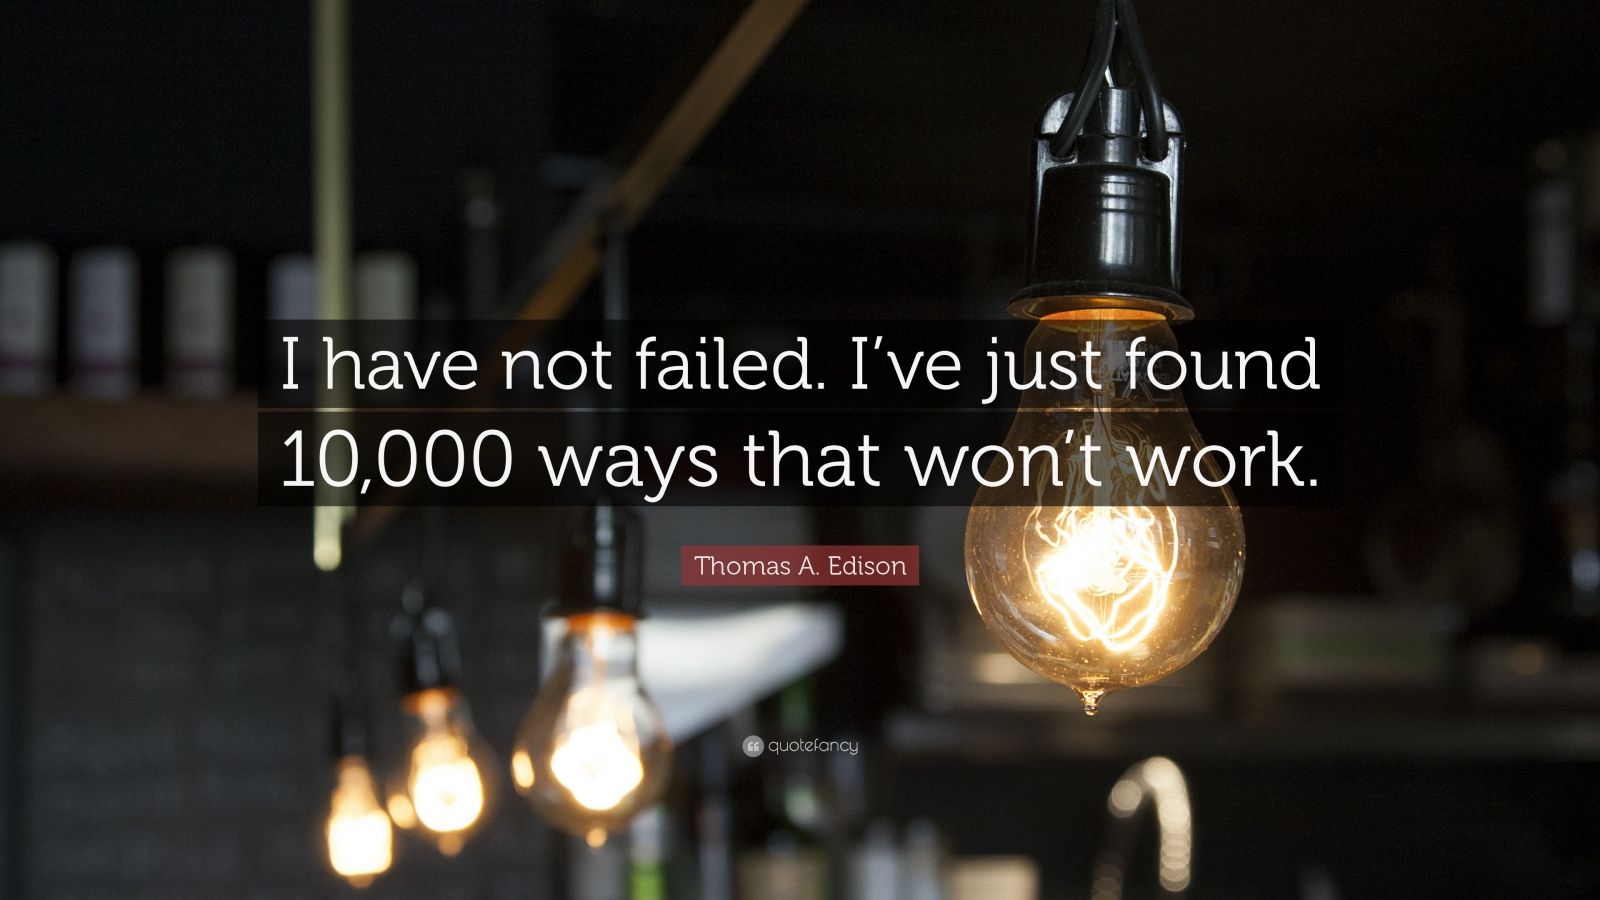 Thomas A. Edison Quotes (20 wallpapers) - Quotefancy